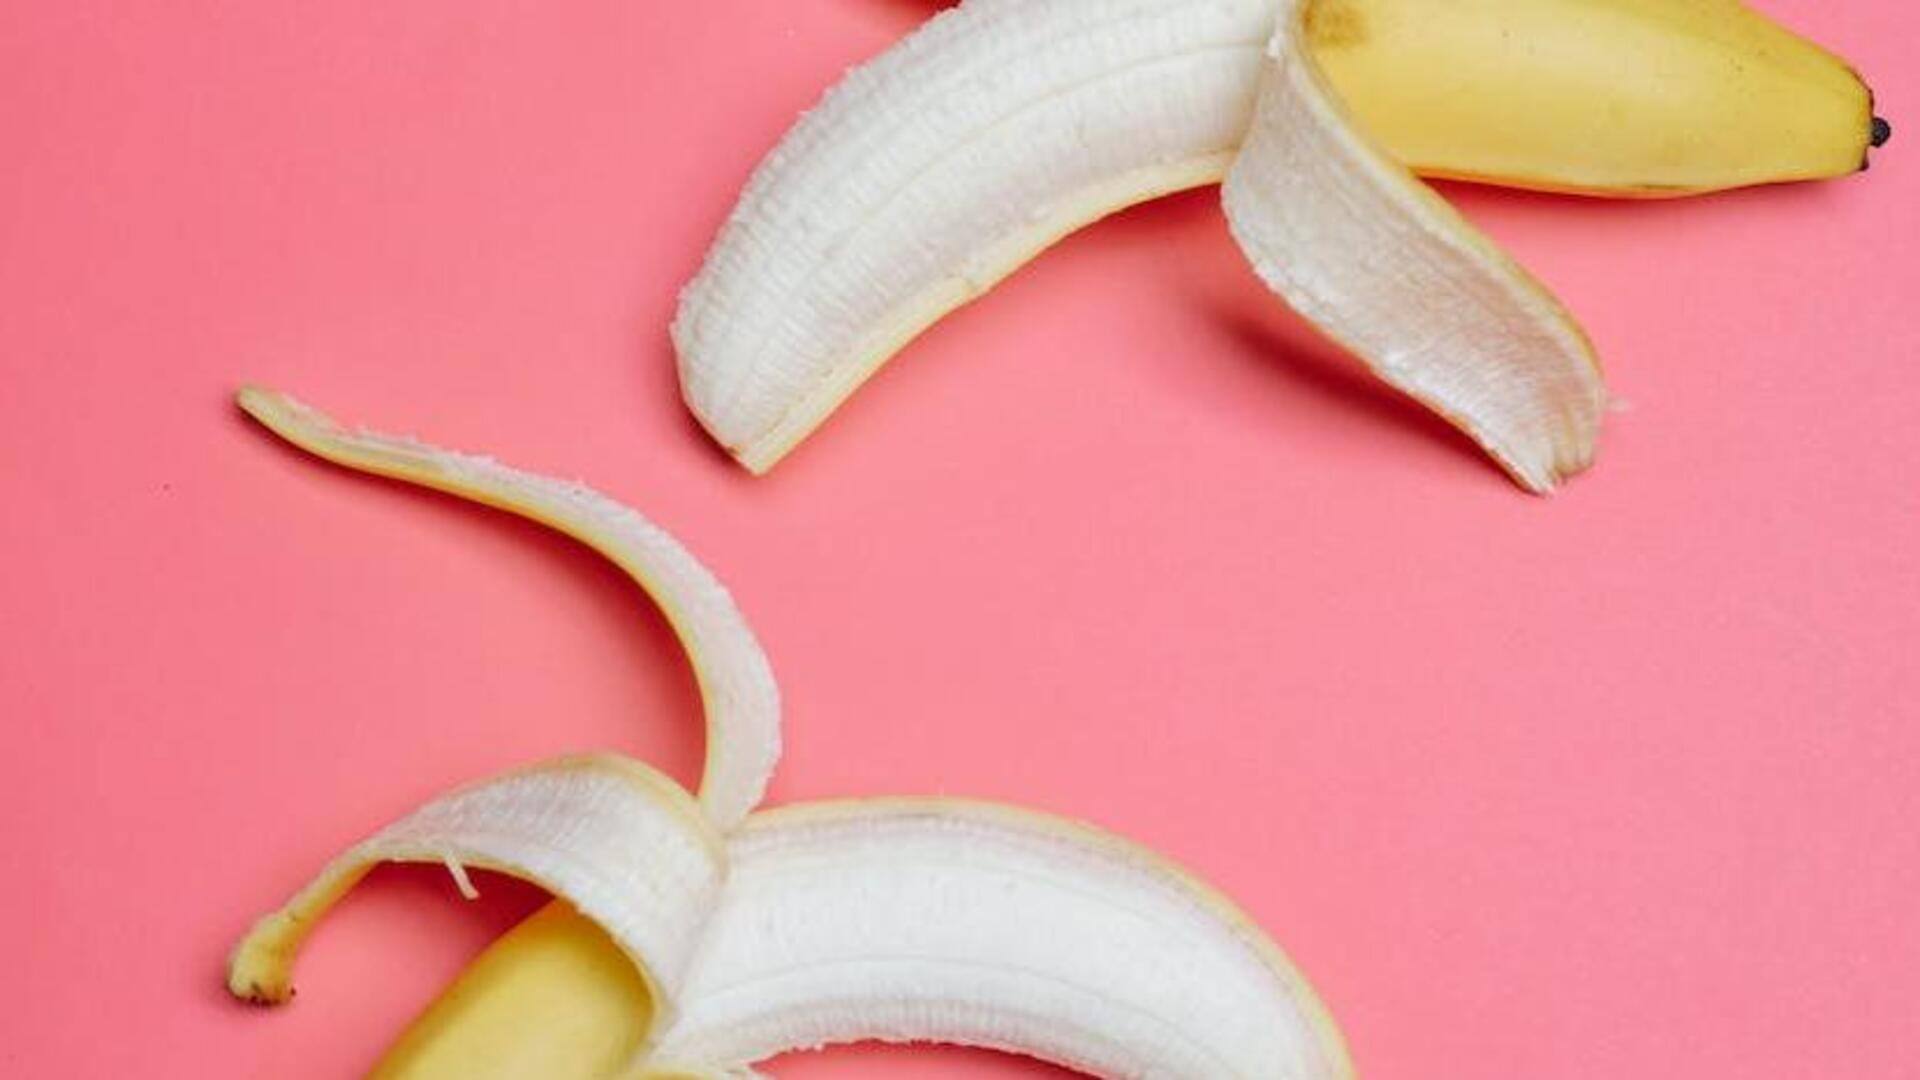 Don't throw away fruit peels. Use them for these things